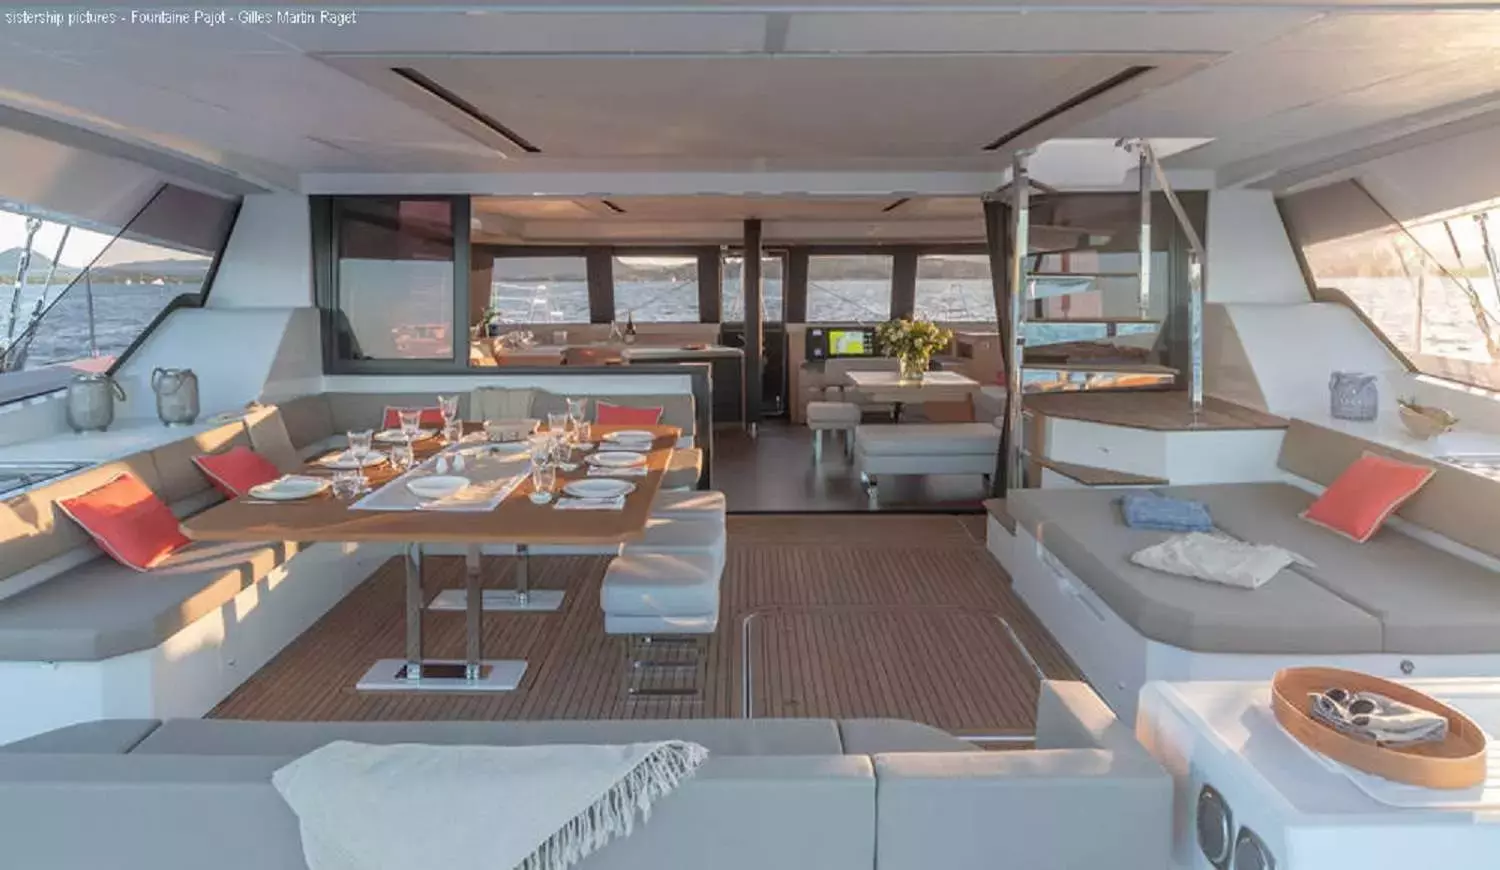 Looma by Fountaine Pajot - Top rates for a Charter of a private Luxury Catamaran in France